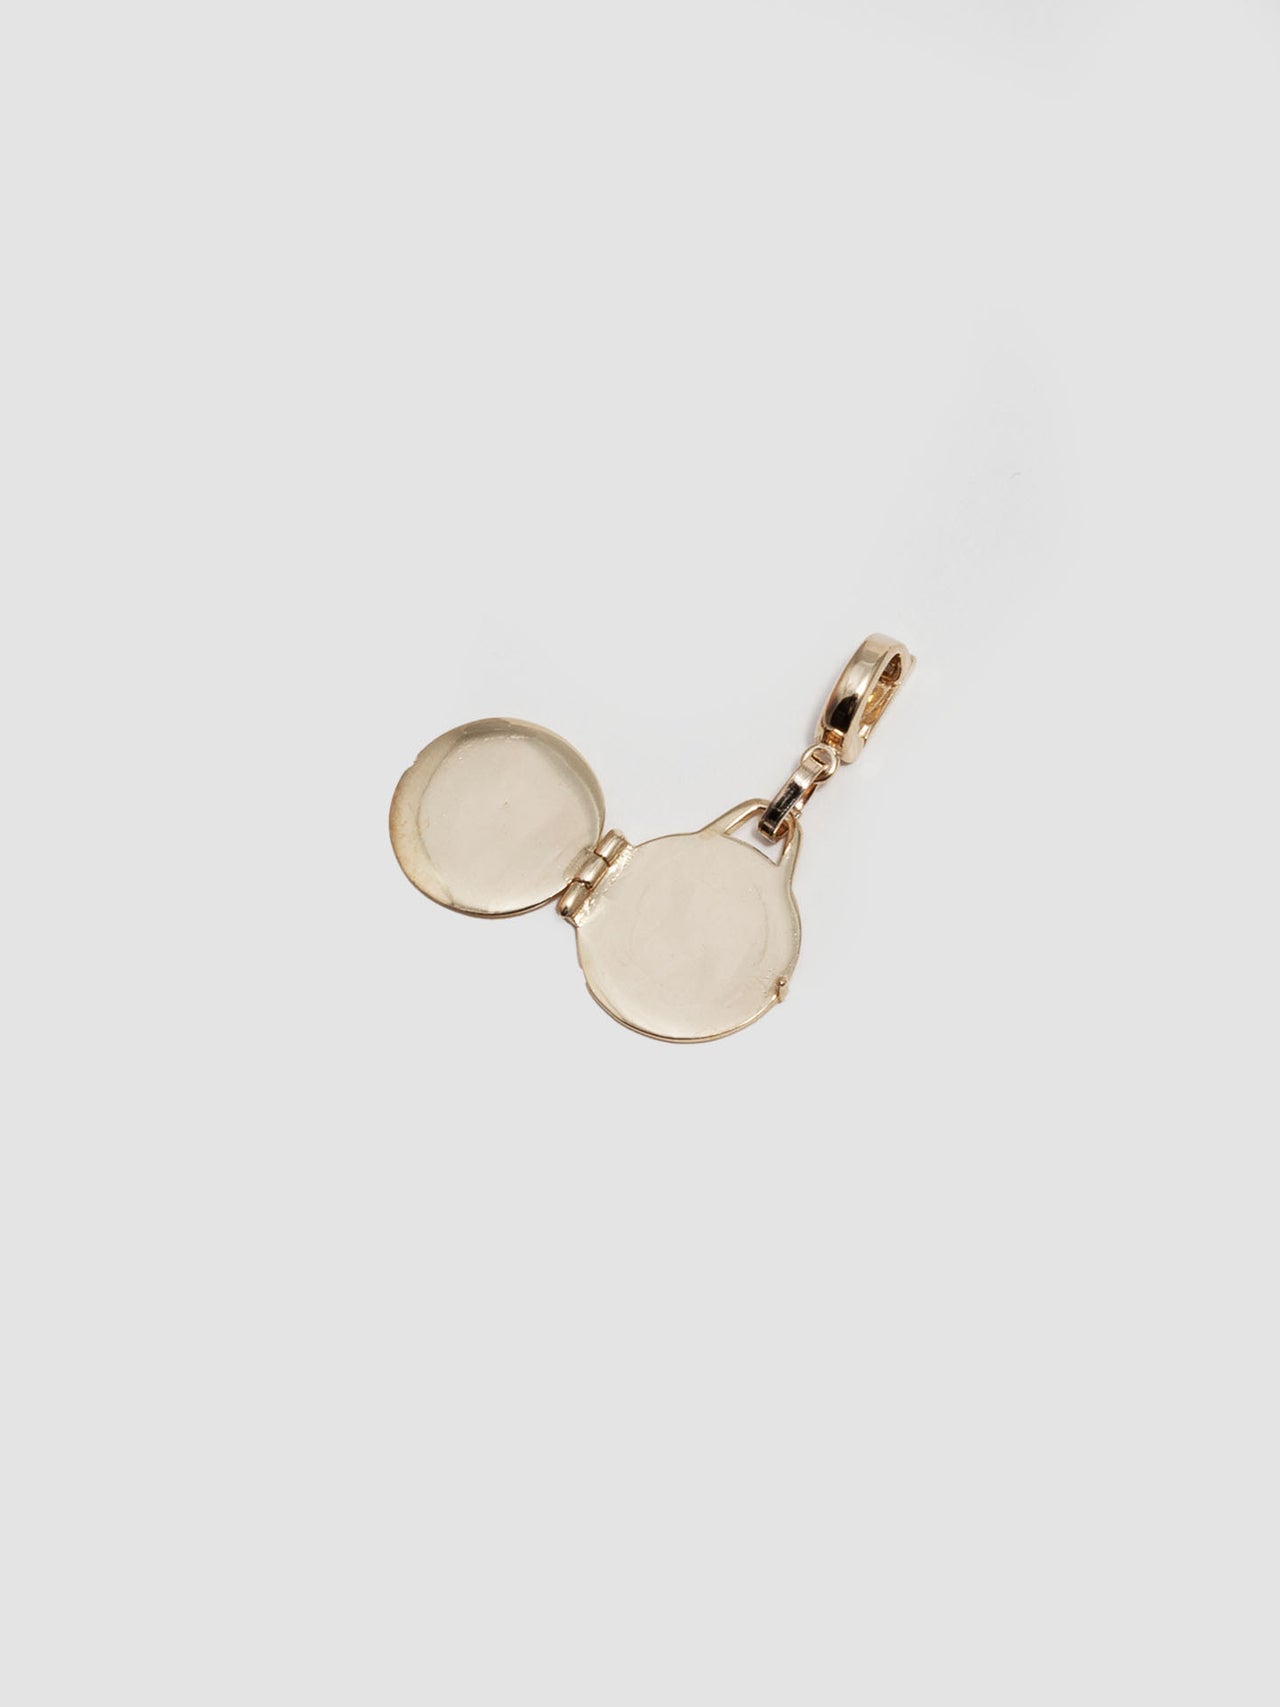 14Kt Yellow Gold Locket Pendant pictured lying open on light grey background. 